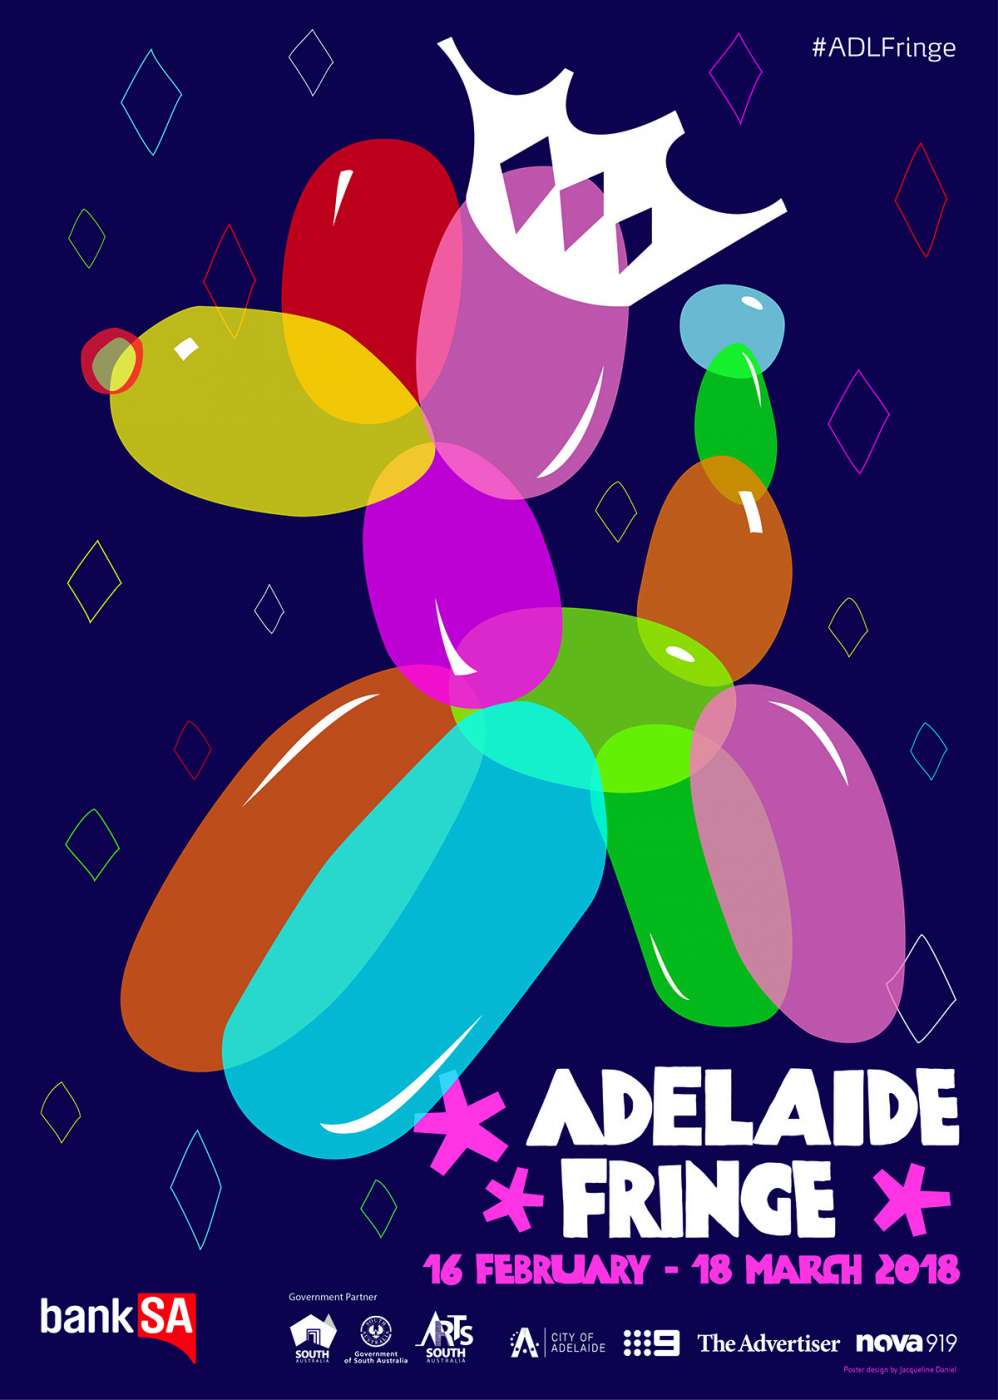 The New Adelaide Fringe Poster Has Just Been Released FIVEaa